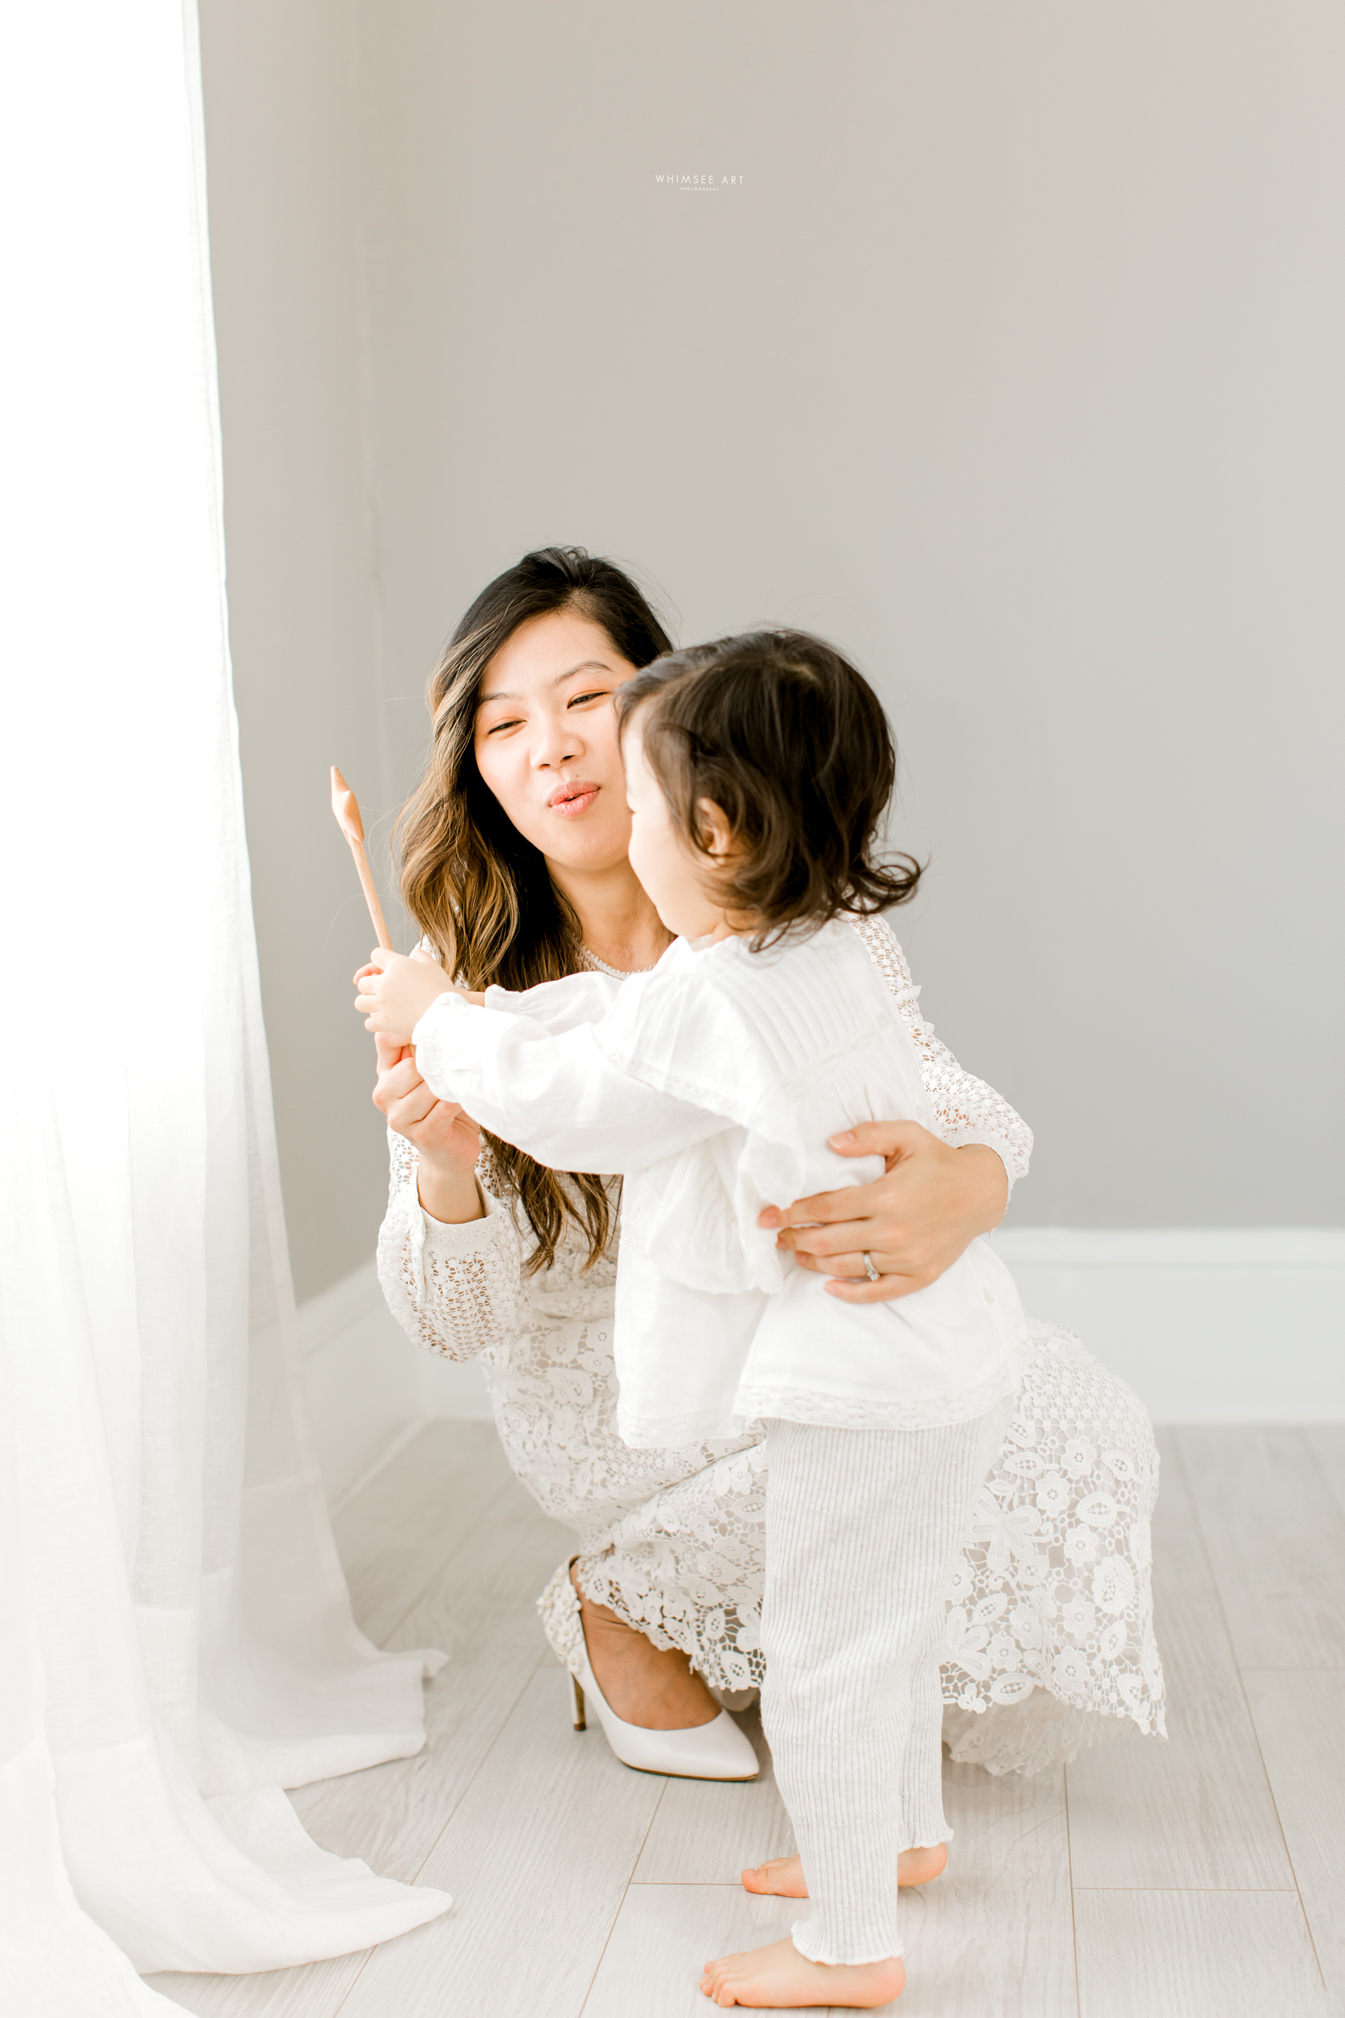 Sweet Clare | Roanoke Family Photography | Whimsee Art Photography